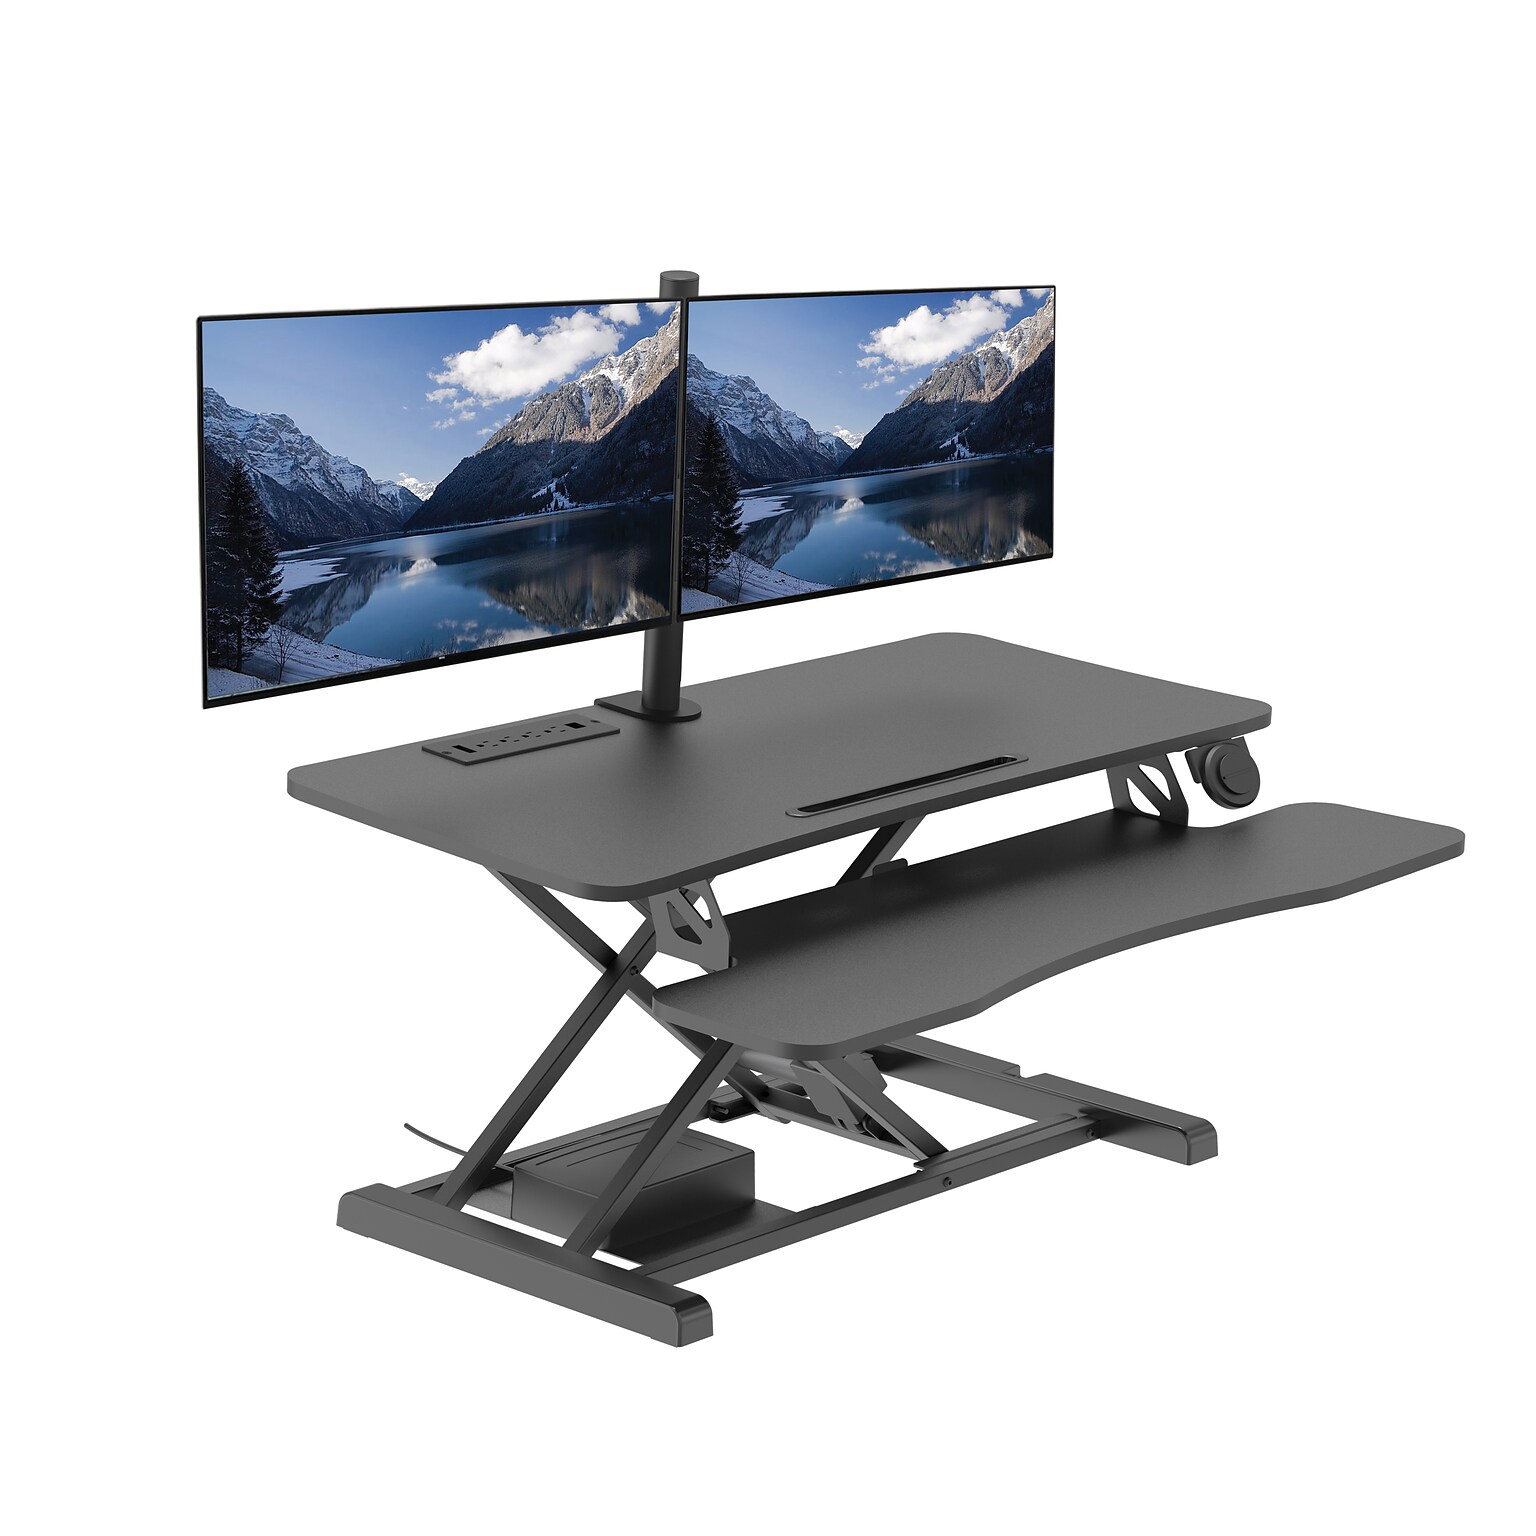 Rocelco 37.4W 5-20H Electric Standing Desk Converter with ACUSB Charger Dual Monitor Mount, Black (R EDRB-DM2)